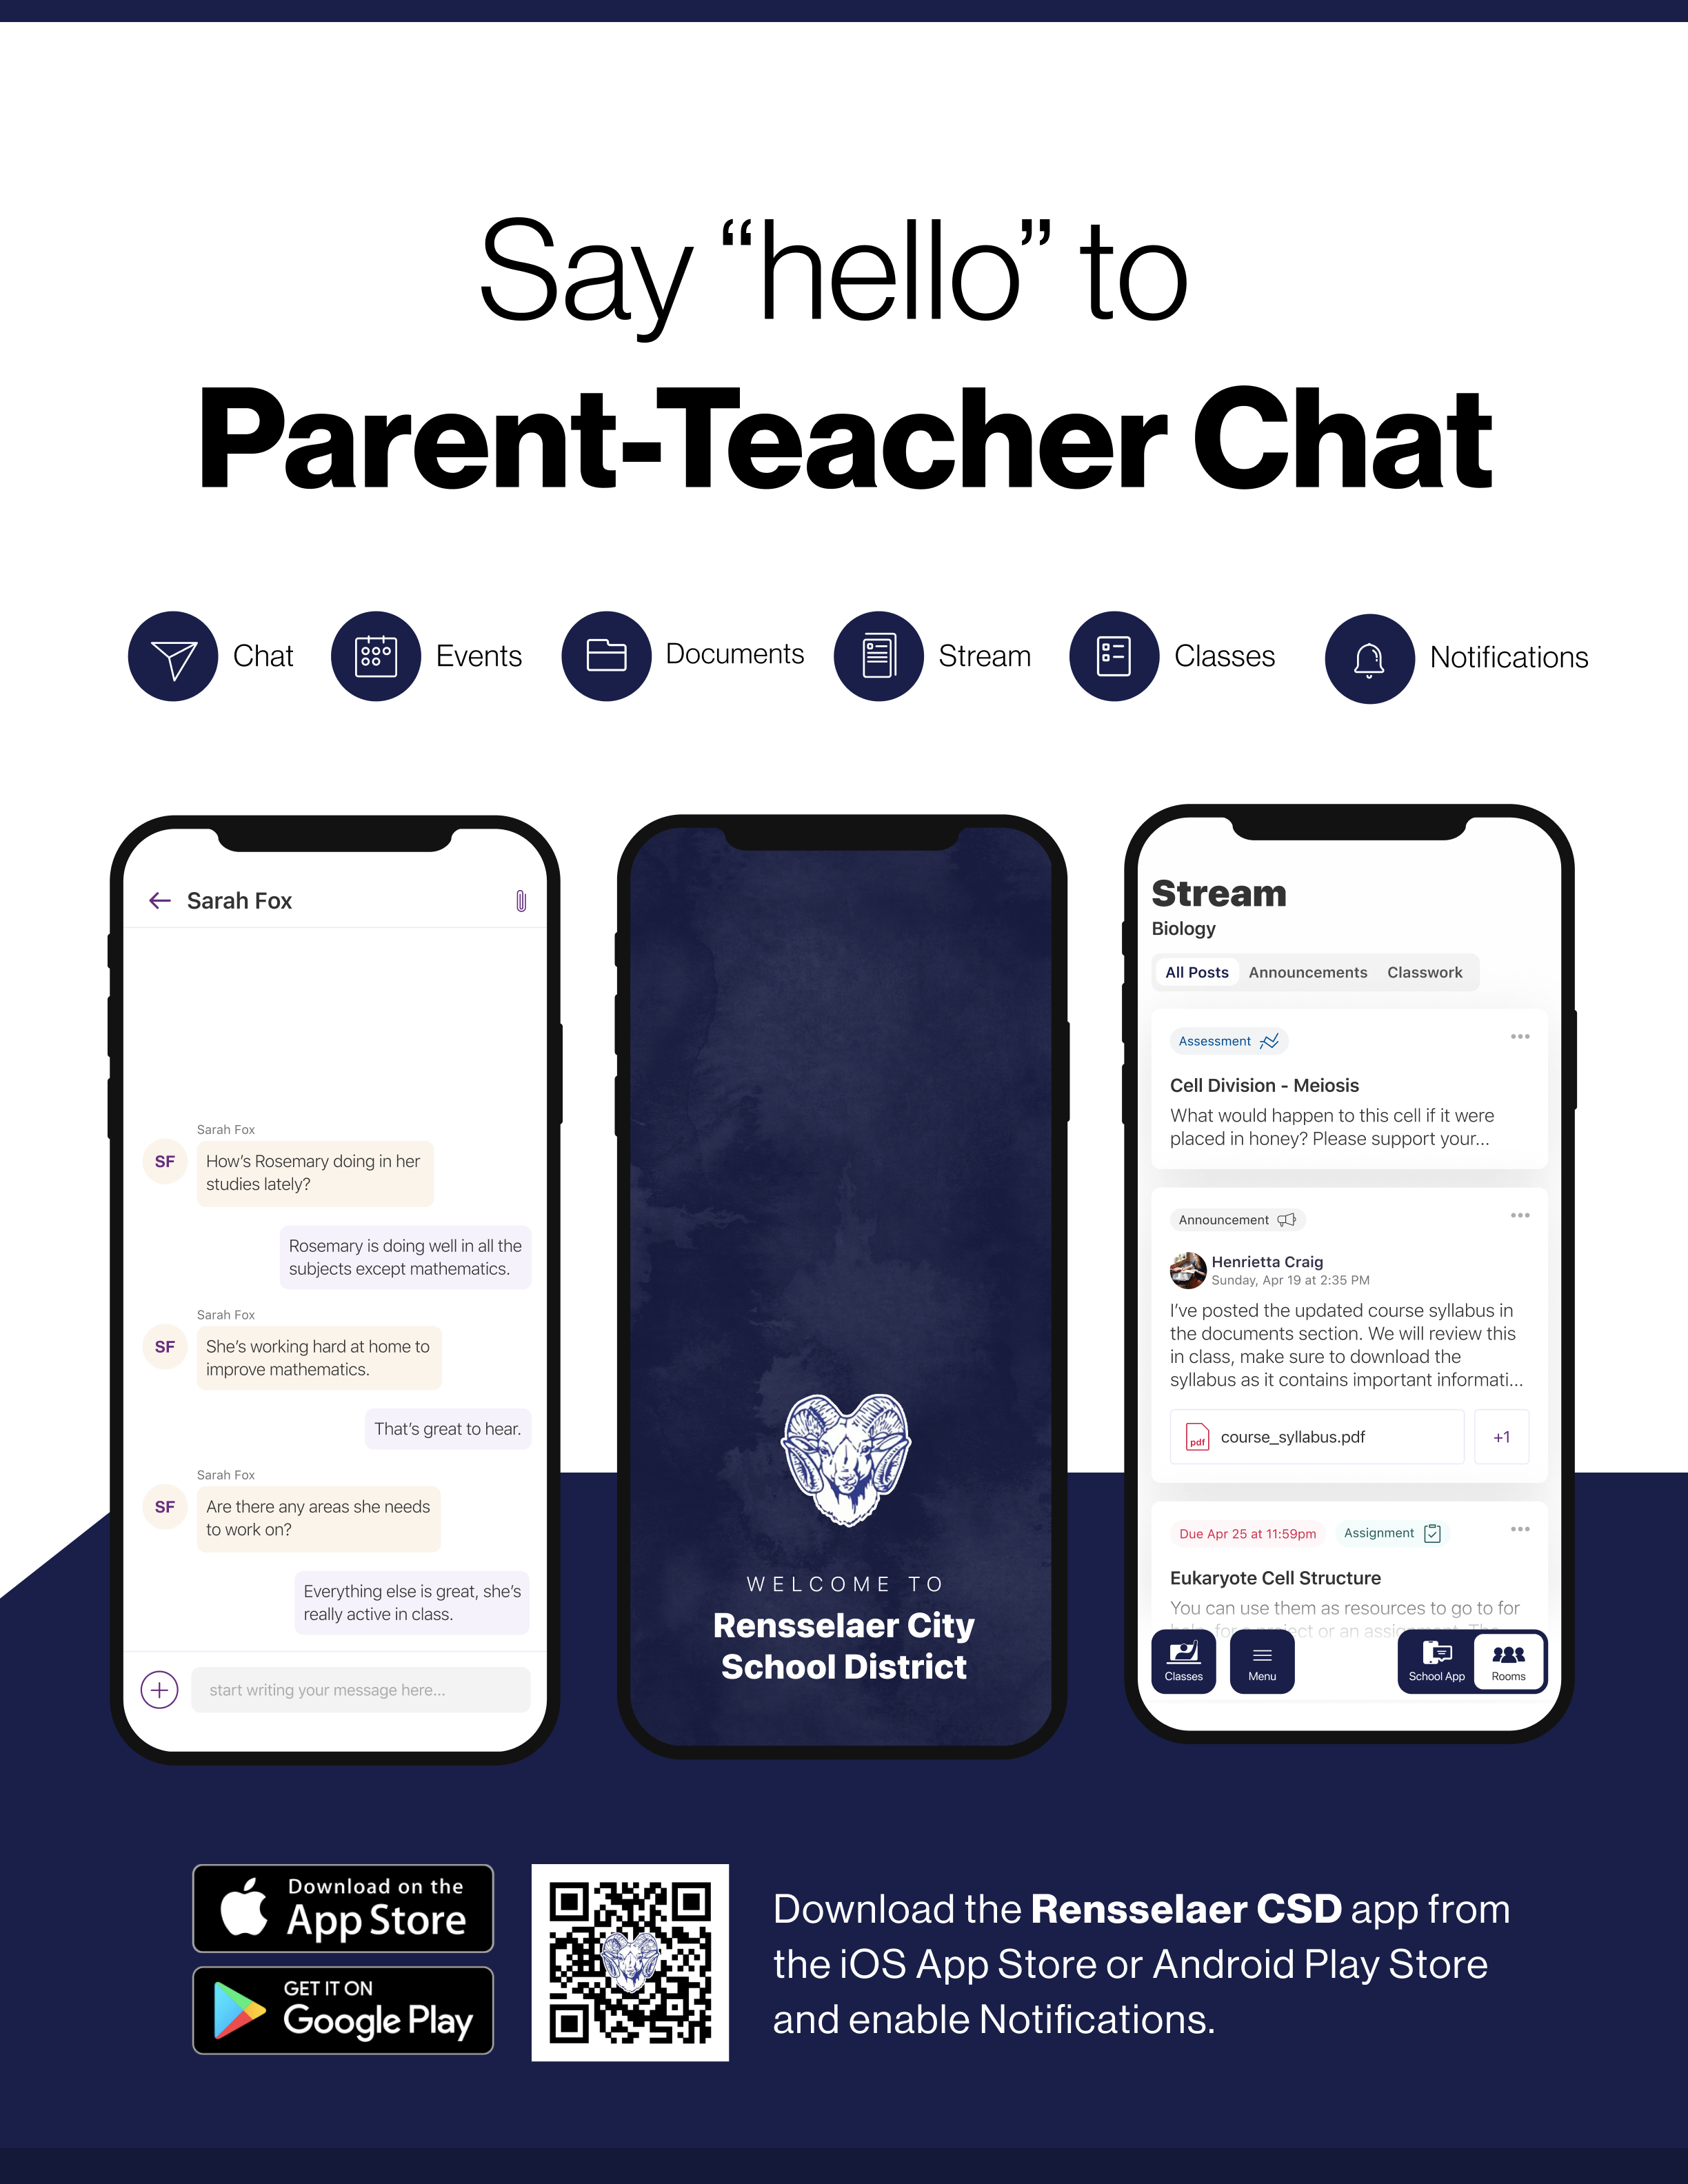 Say hello to Parent-Teacher chat in the new Rooms app. Download the Rensselaer City School District app in the Google Play or Apple App store